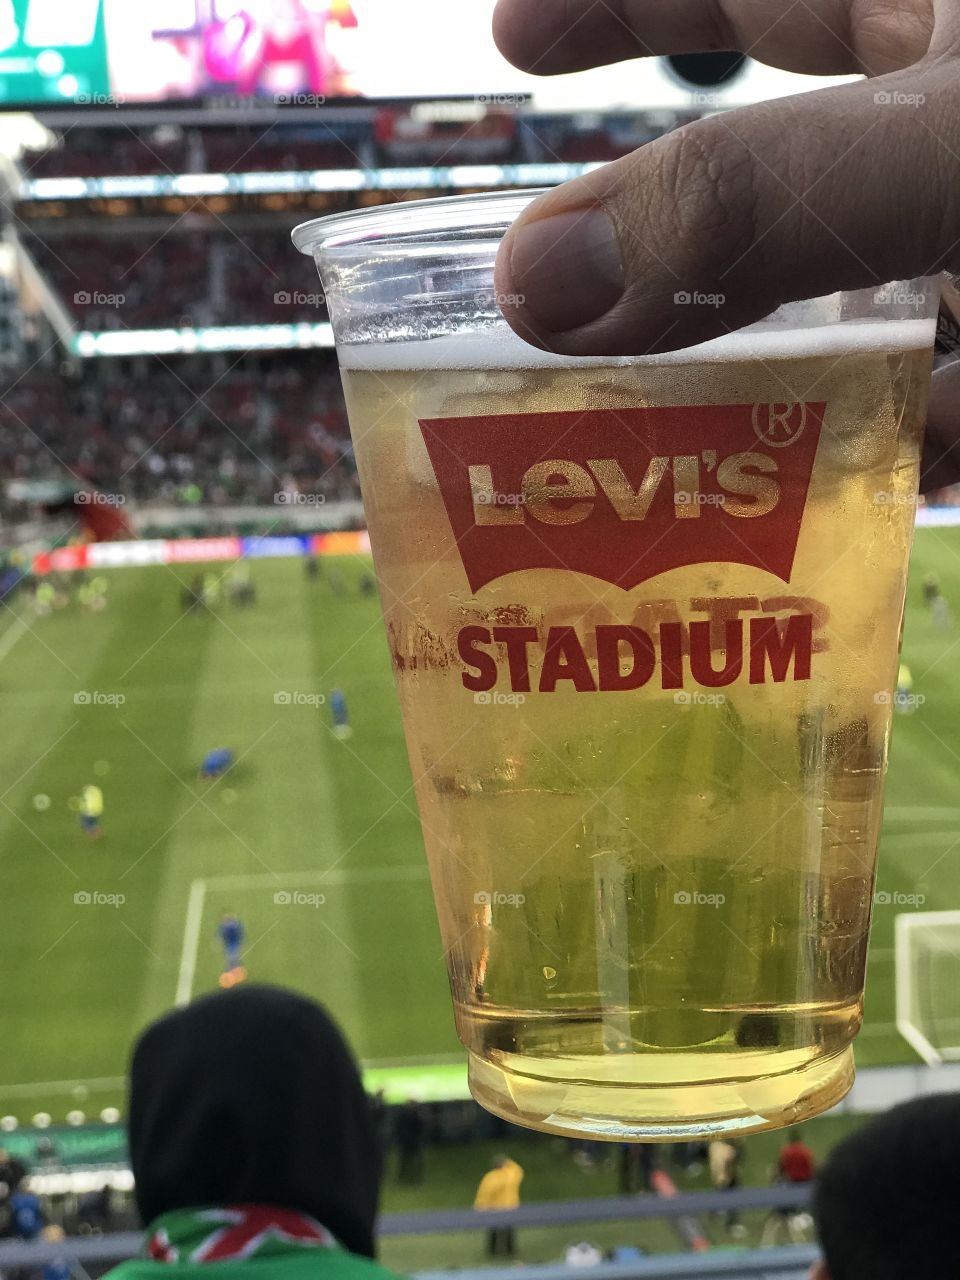 “Cerveza” at the Levi’s Stadium for the Mexico vs Iceland soccer match. It’s a marvelous stadium, too. And Mexico won, 3-0. A perfect end to the day in which we took my godson to celebrate his 12th birthday. #mextour #levisstadium #mexico #nofilters